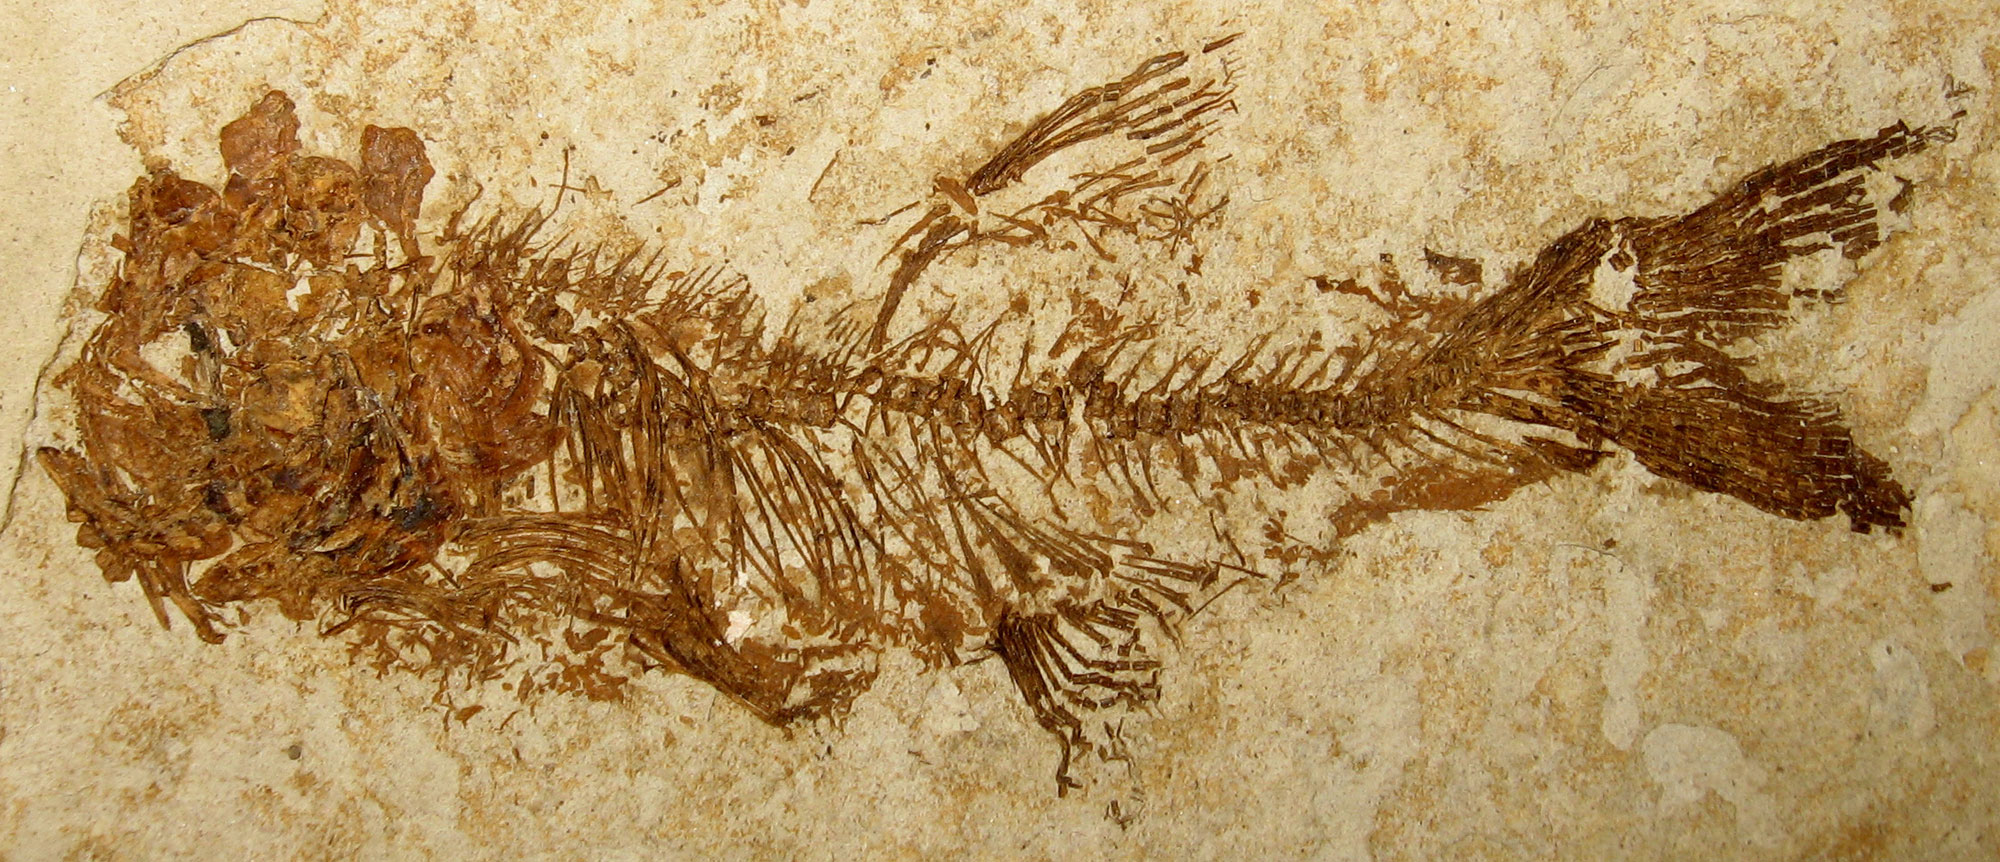 Photograph of a fossil mooneye fish from the of Eocene Republic, Washington. The fish appears relatively complete but the bones are not quite in life position.